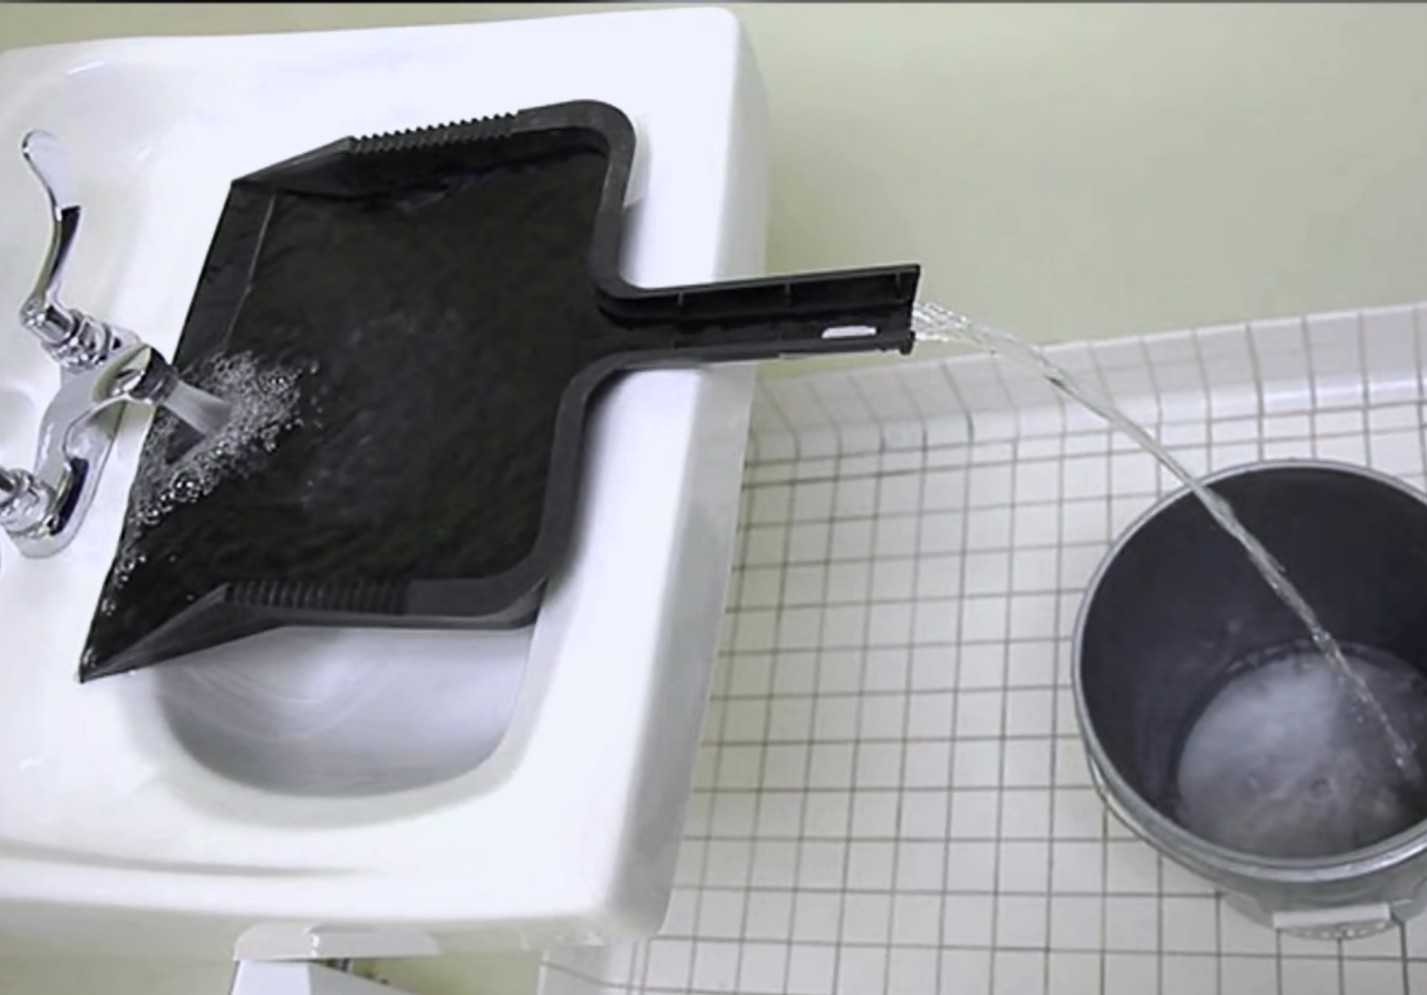 Fill any container that doesn't fit in the sink with the dustpan